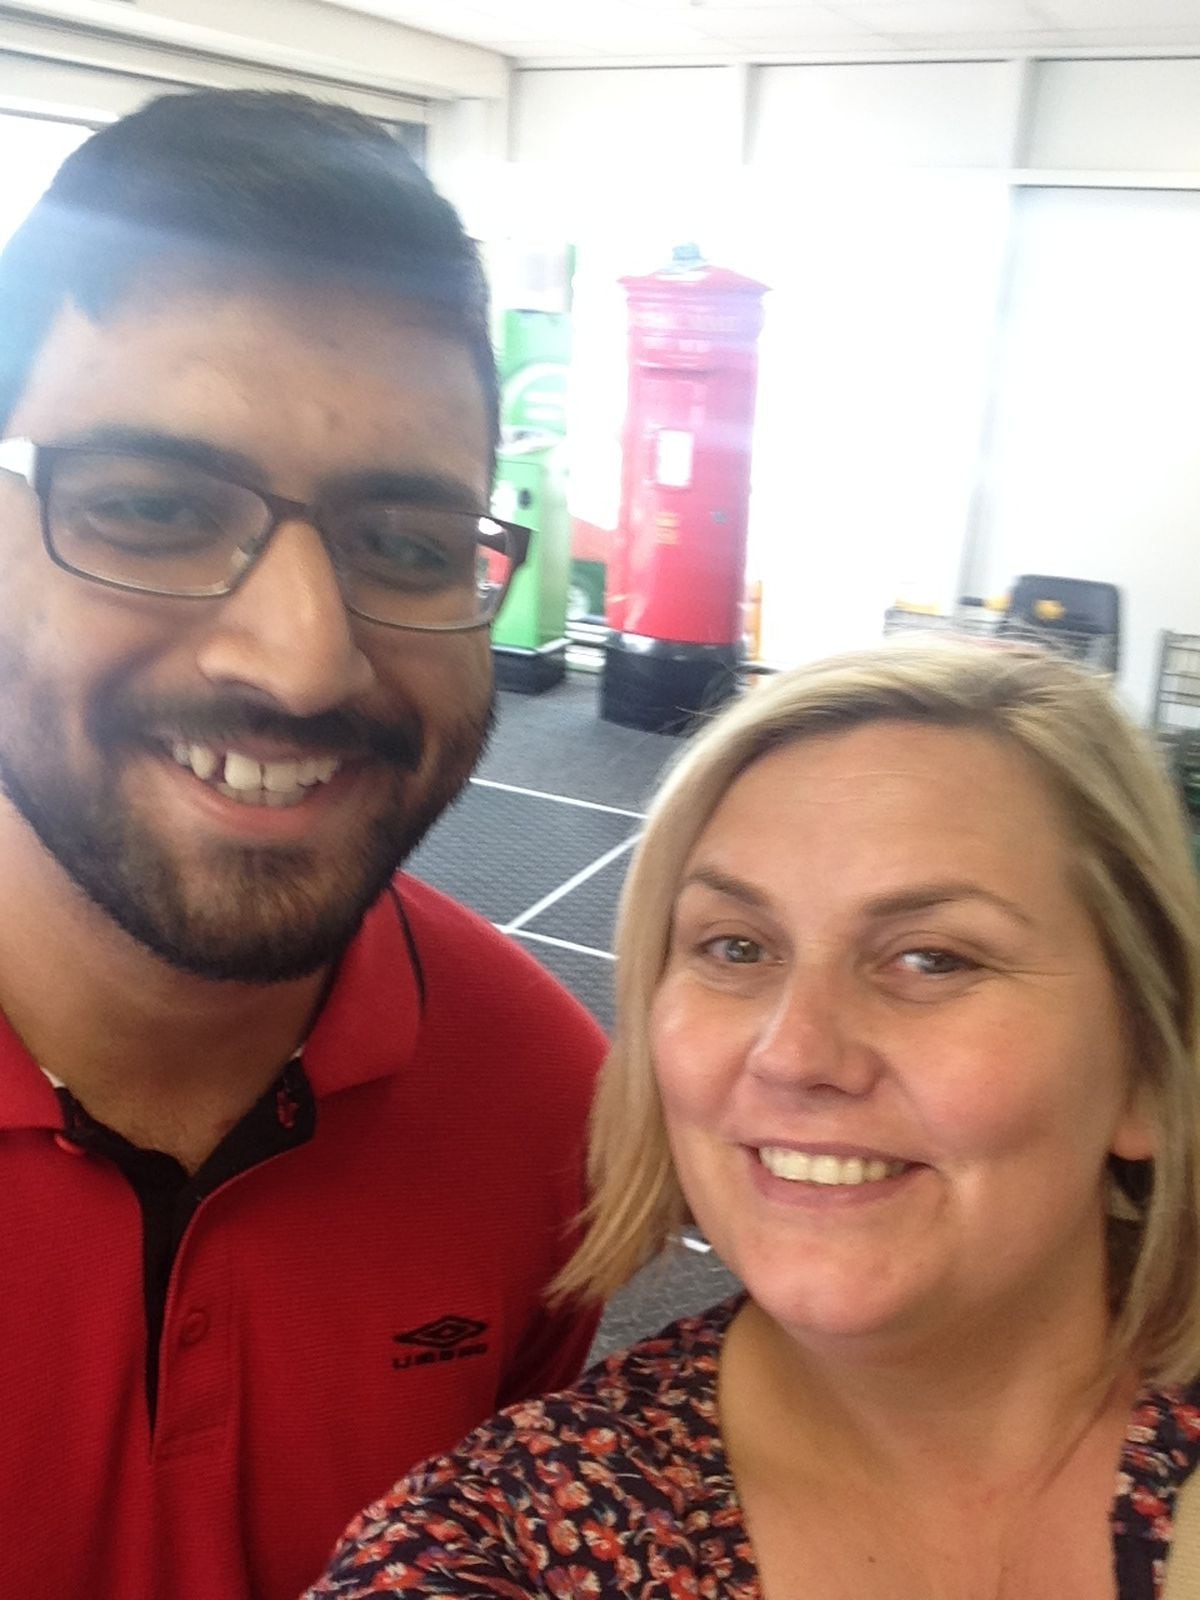 Lisa Potts when she bumped into Ahmed Malik in the supermarket, 20 years after she saved his life